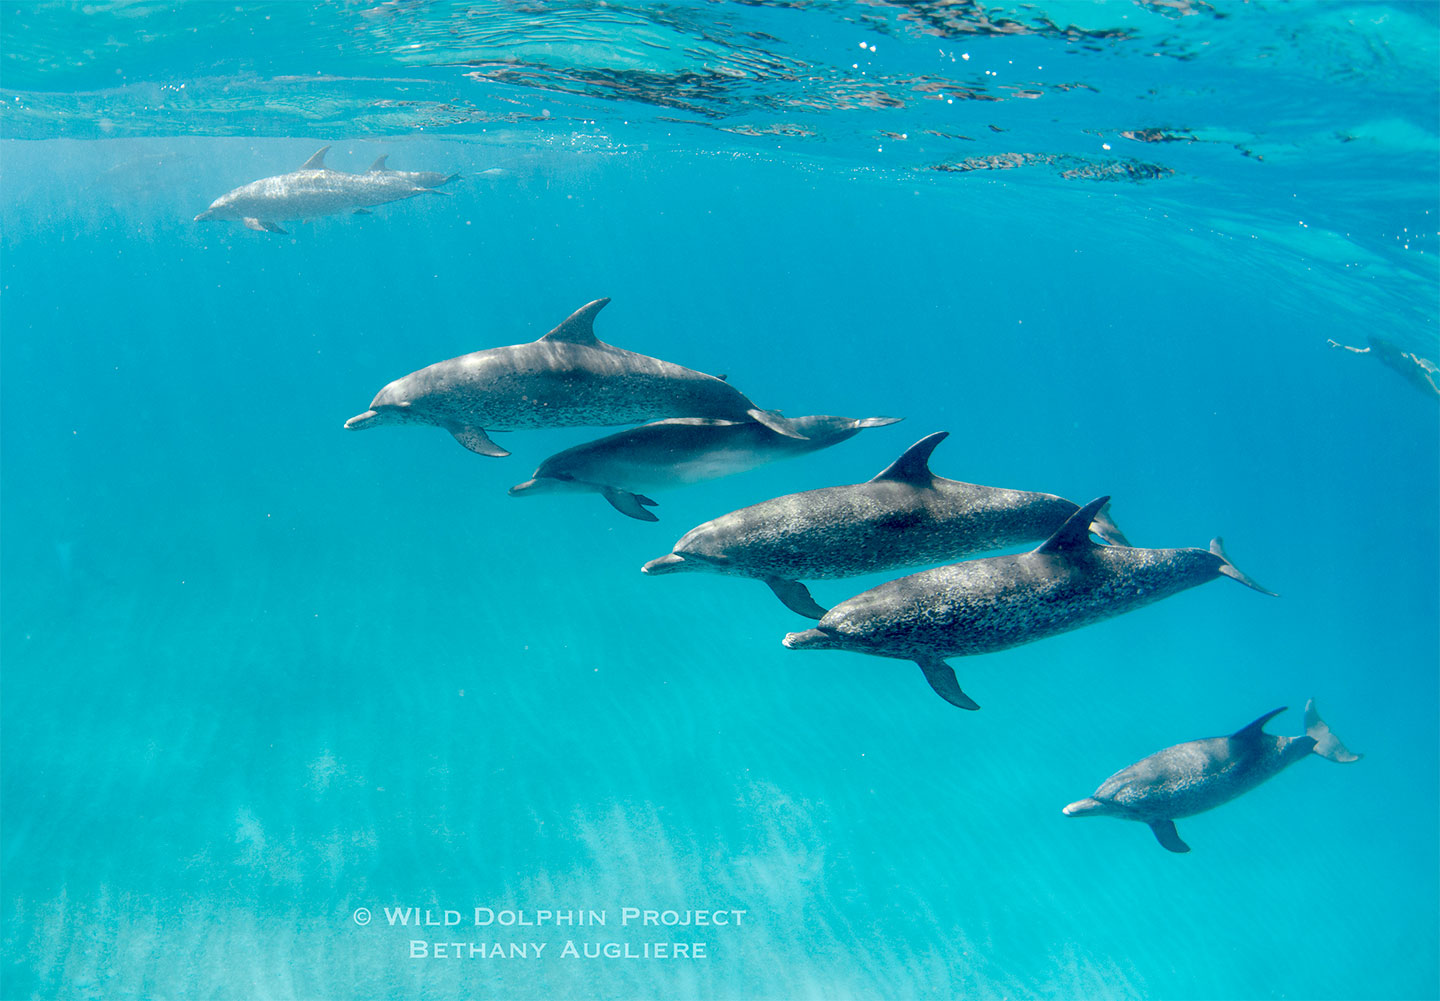 six spotted dolphins swimming together just under the surface of the water, they are spread out in a diagonal line across the image from middle top left to bottom right